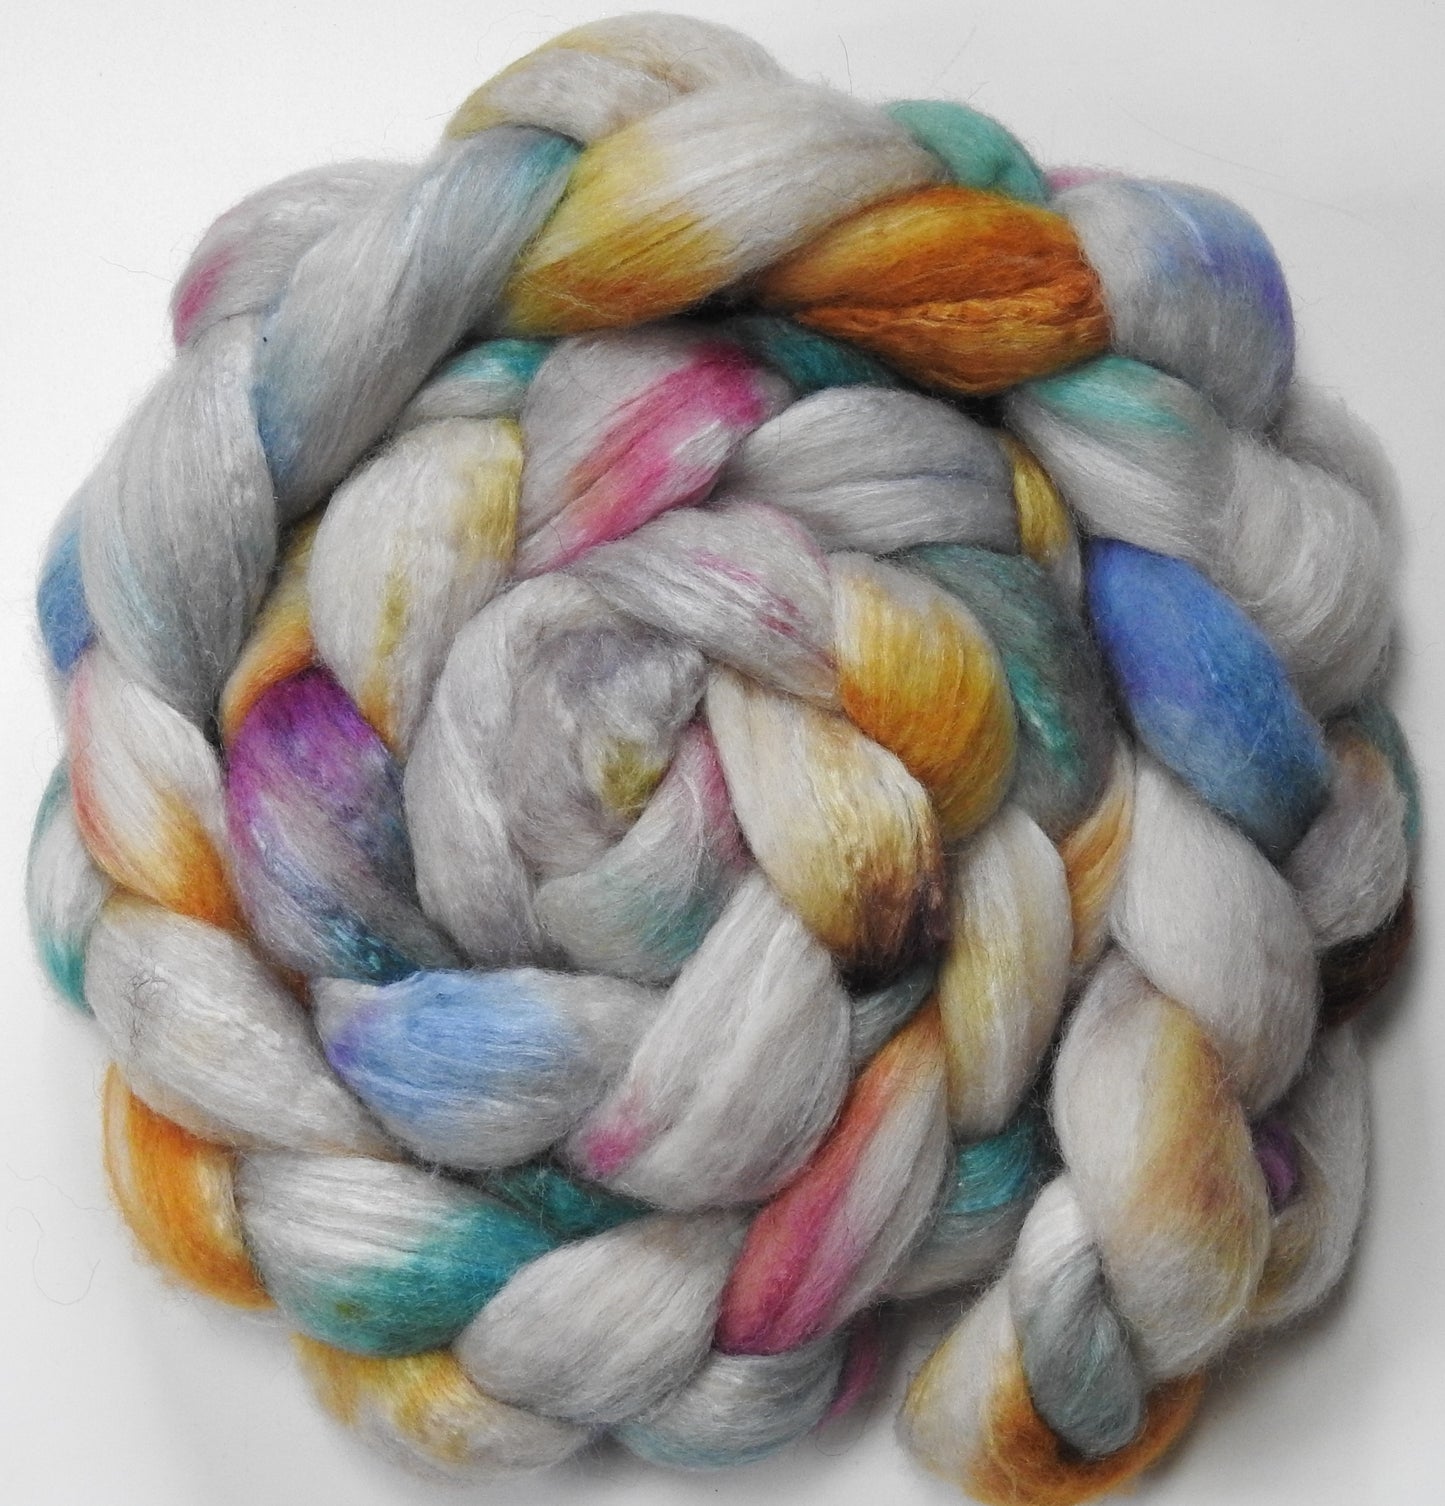 Glass Houses (5.9 oz) - Blue-faced Leicester/ Tussah Silk (75/25)